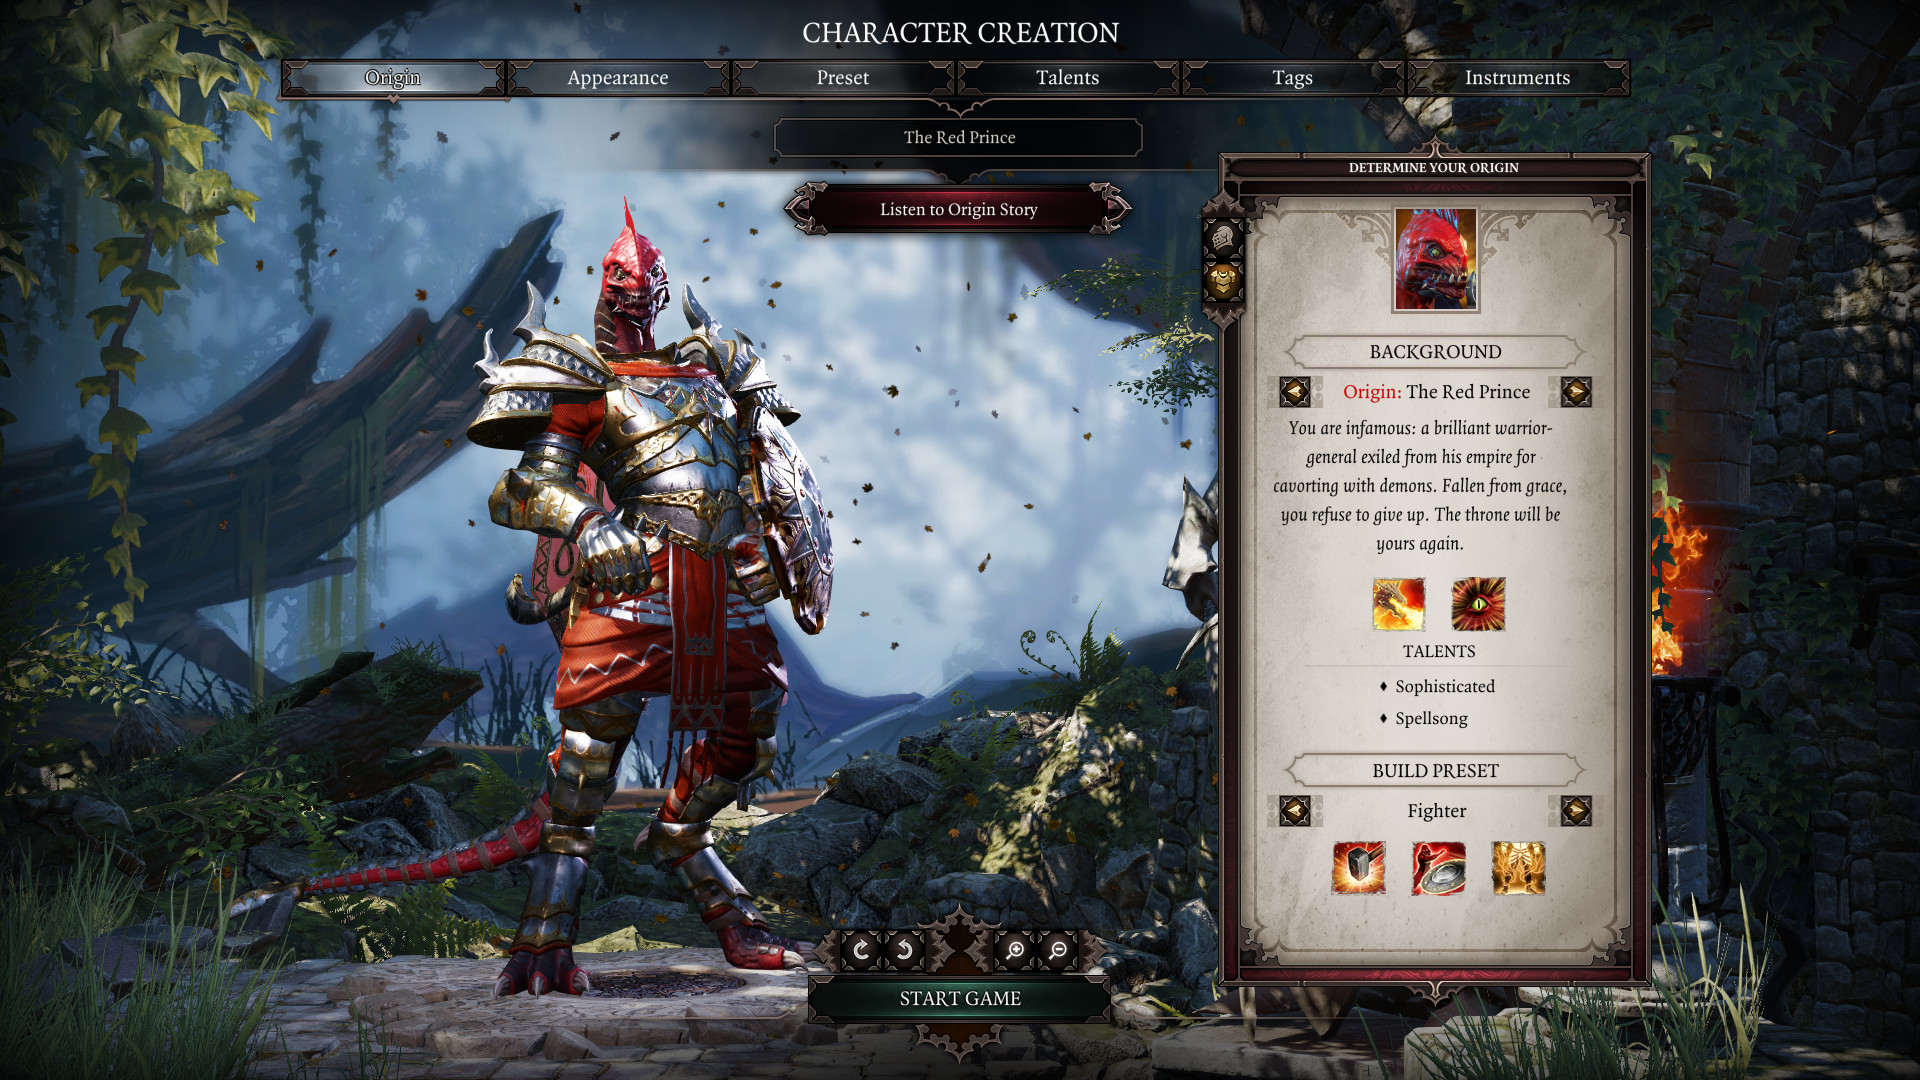 divinity 2 switch review